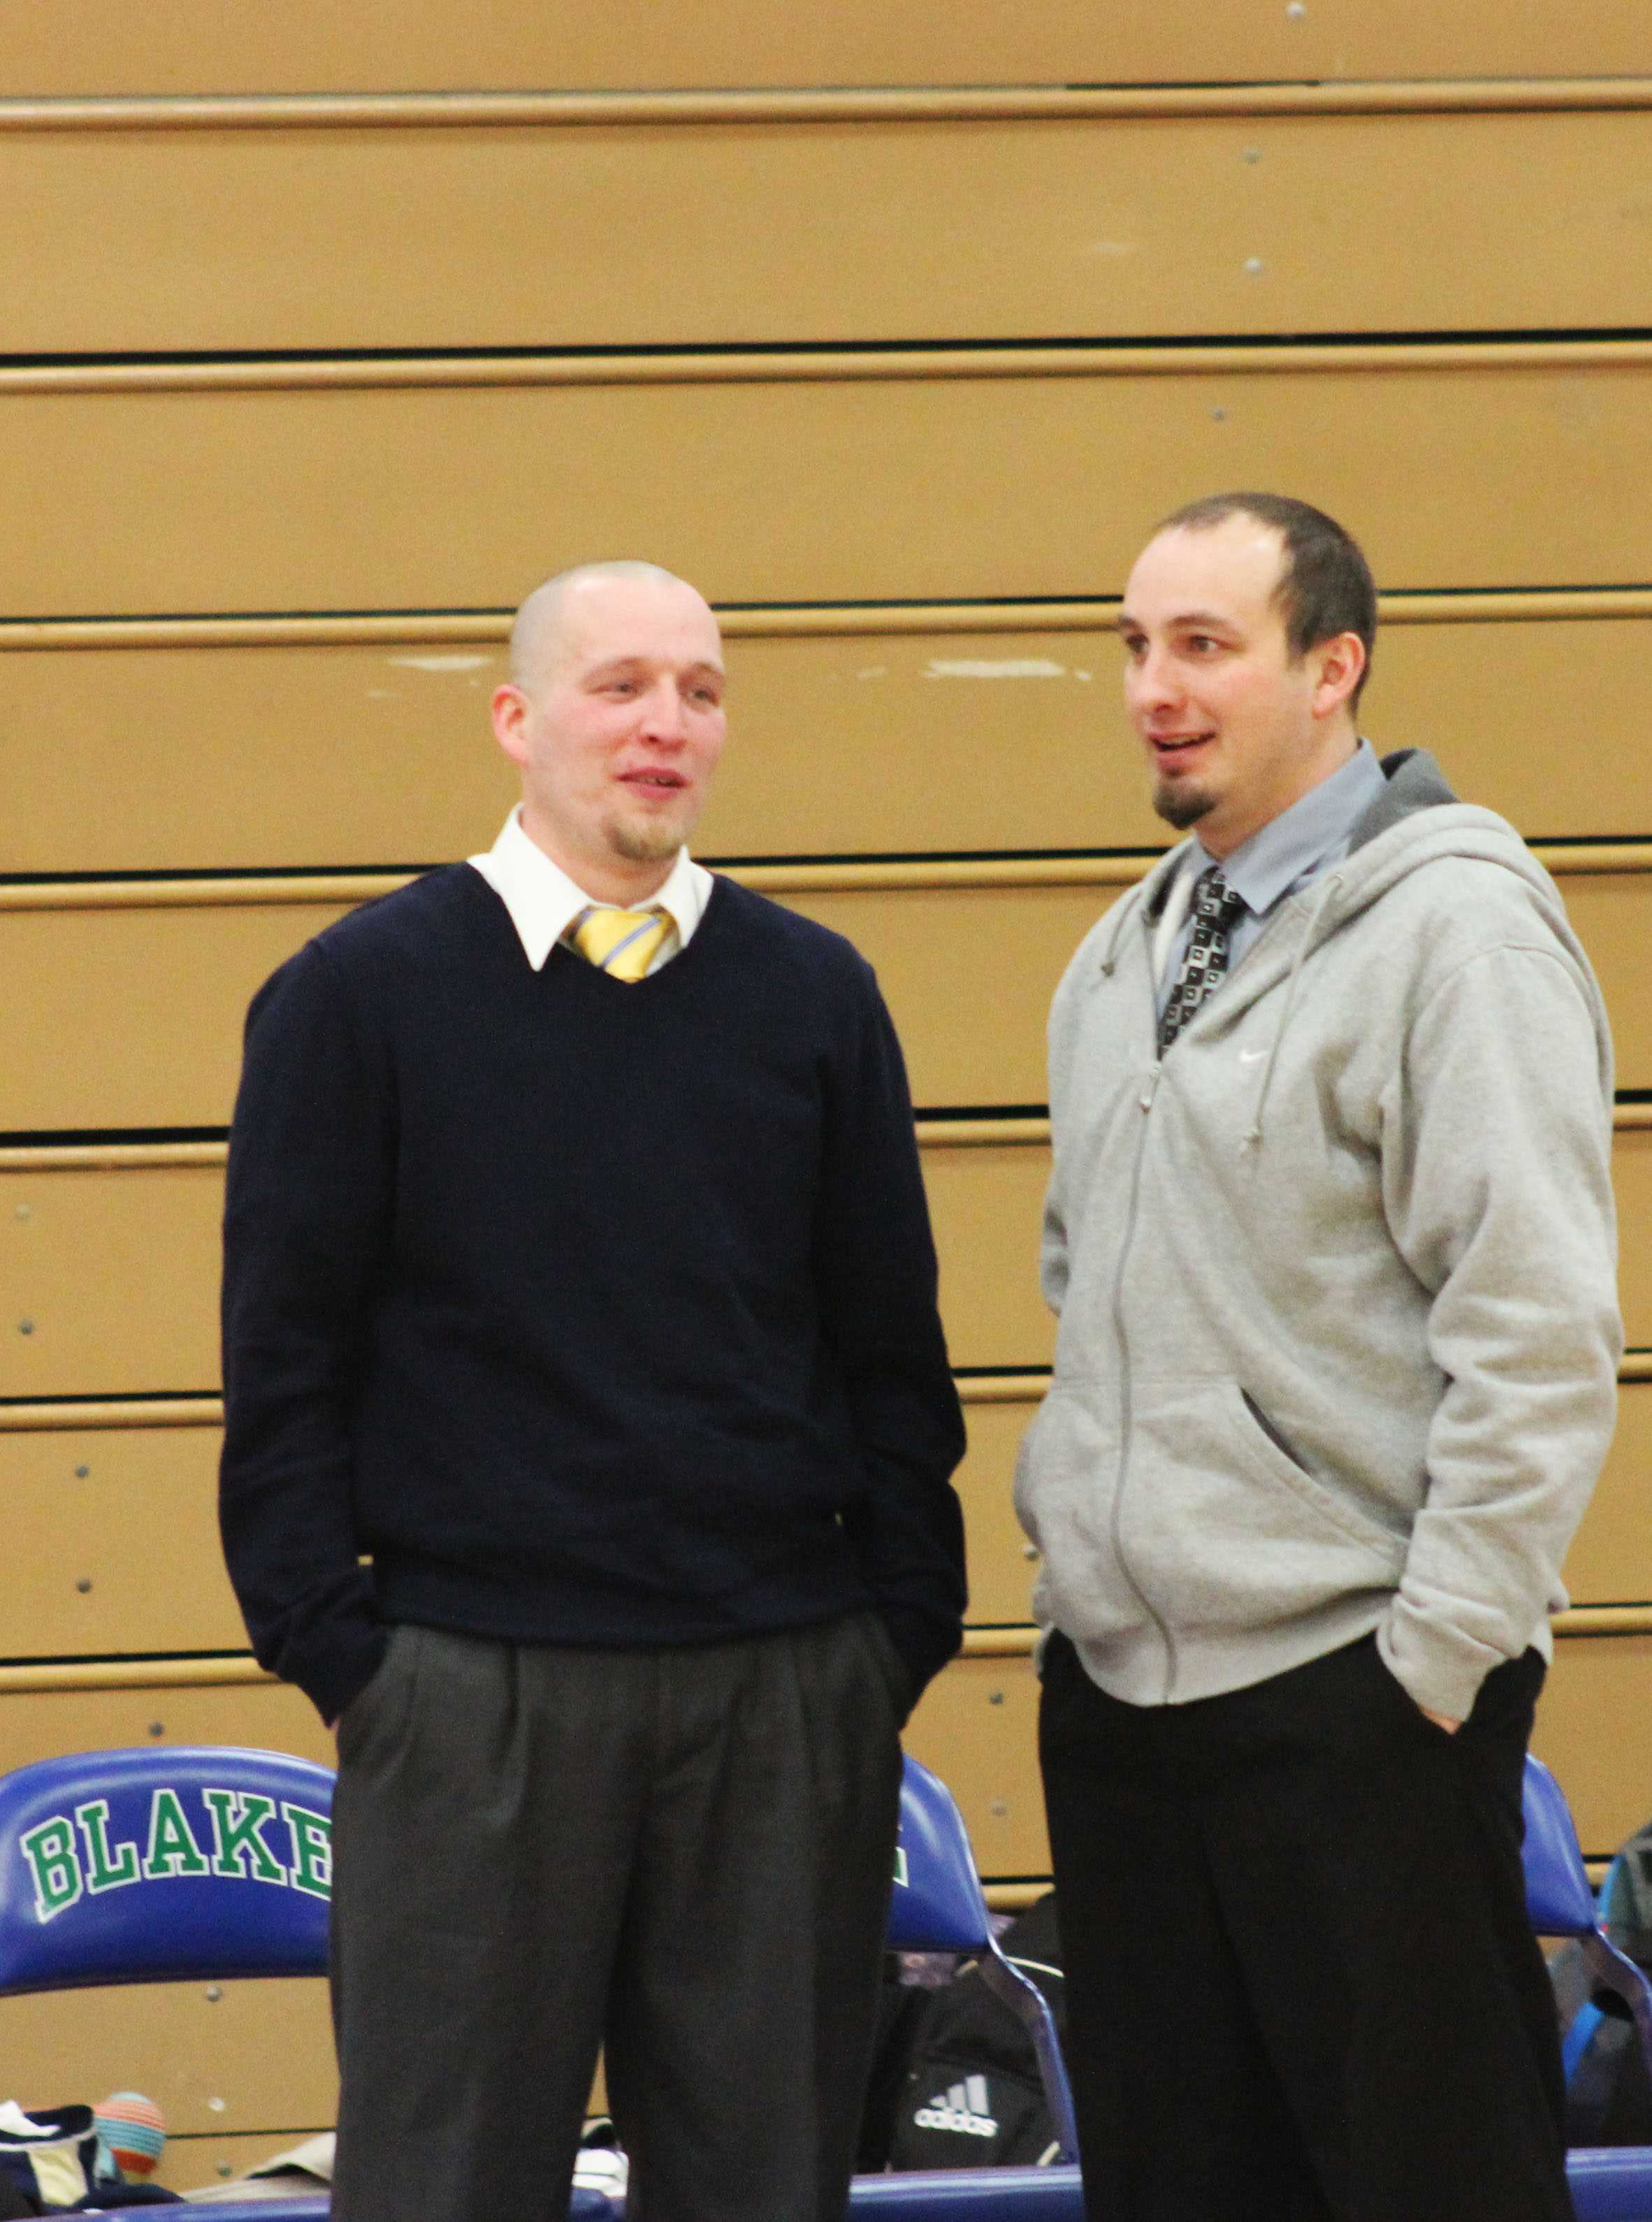 Leigh and Rick Hemric discuss strategy before a game against the Blake School on Jan. 25.  “I would say we have a very similar coaching style. Off the court he has strengths where I have weaknesses and vice versa,” Rick Hemric said.